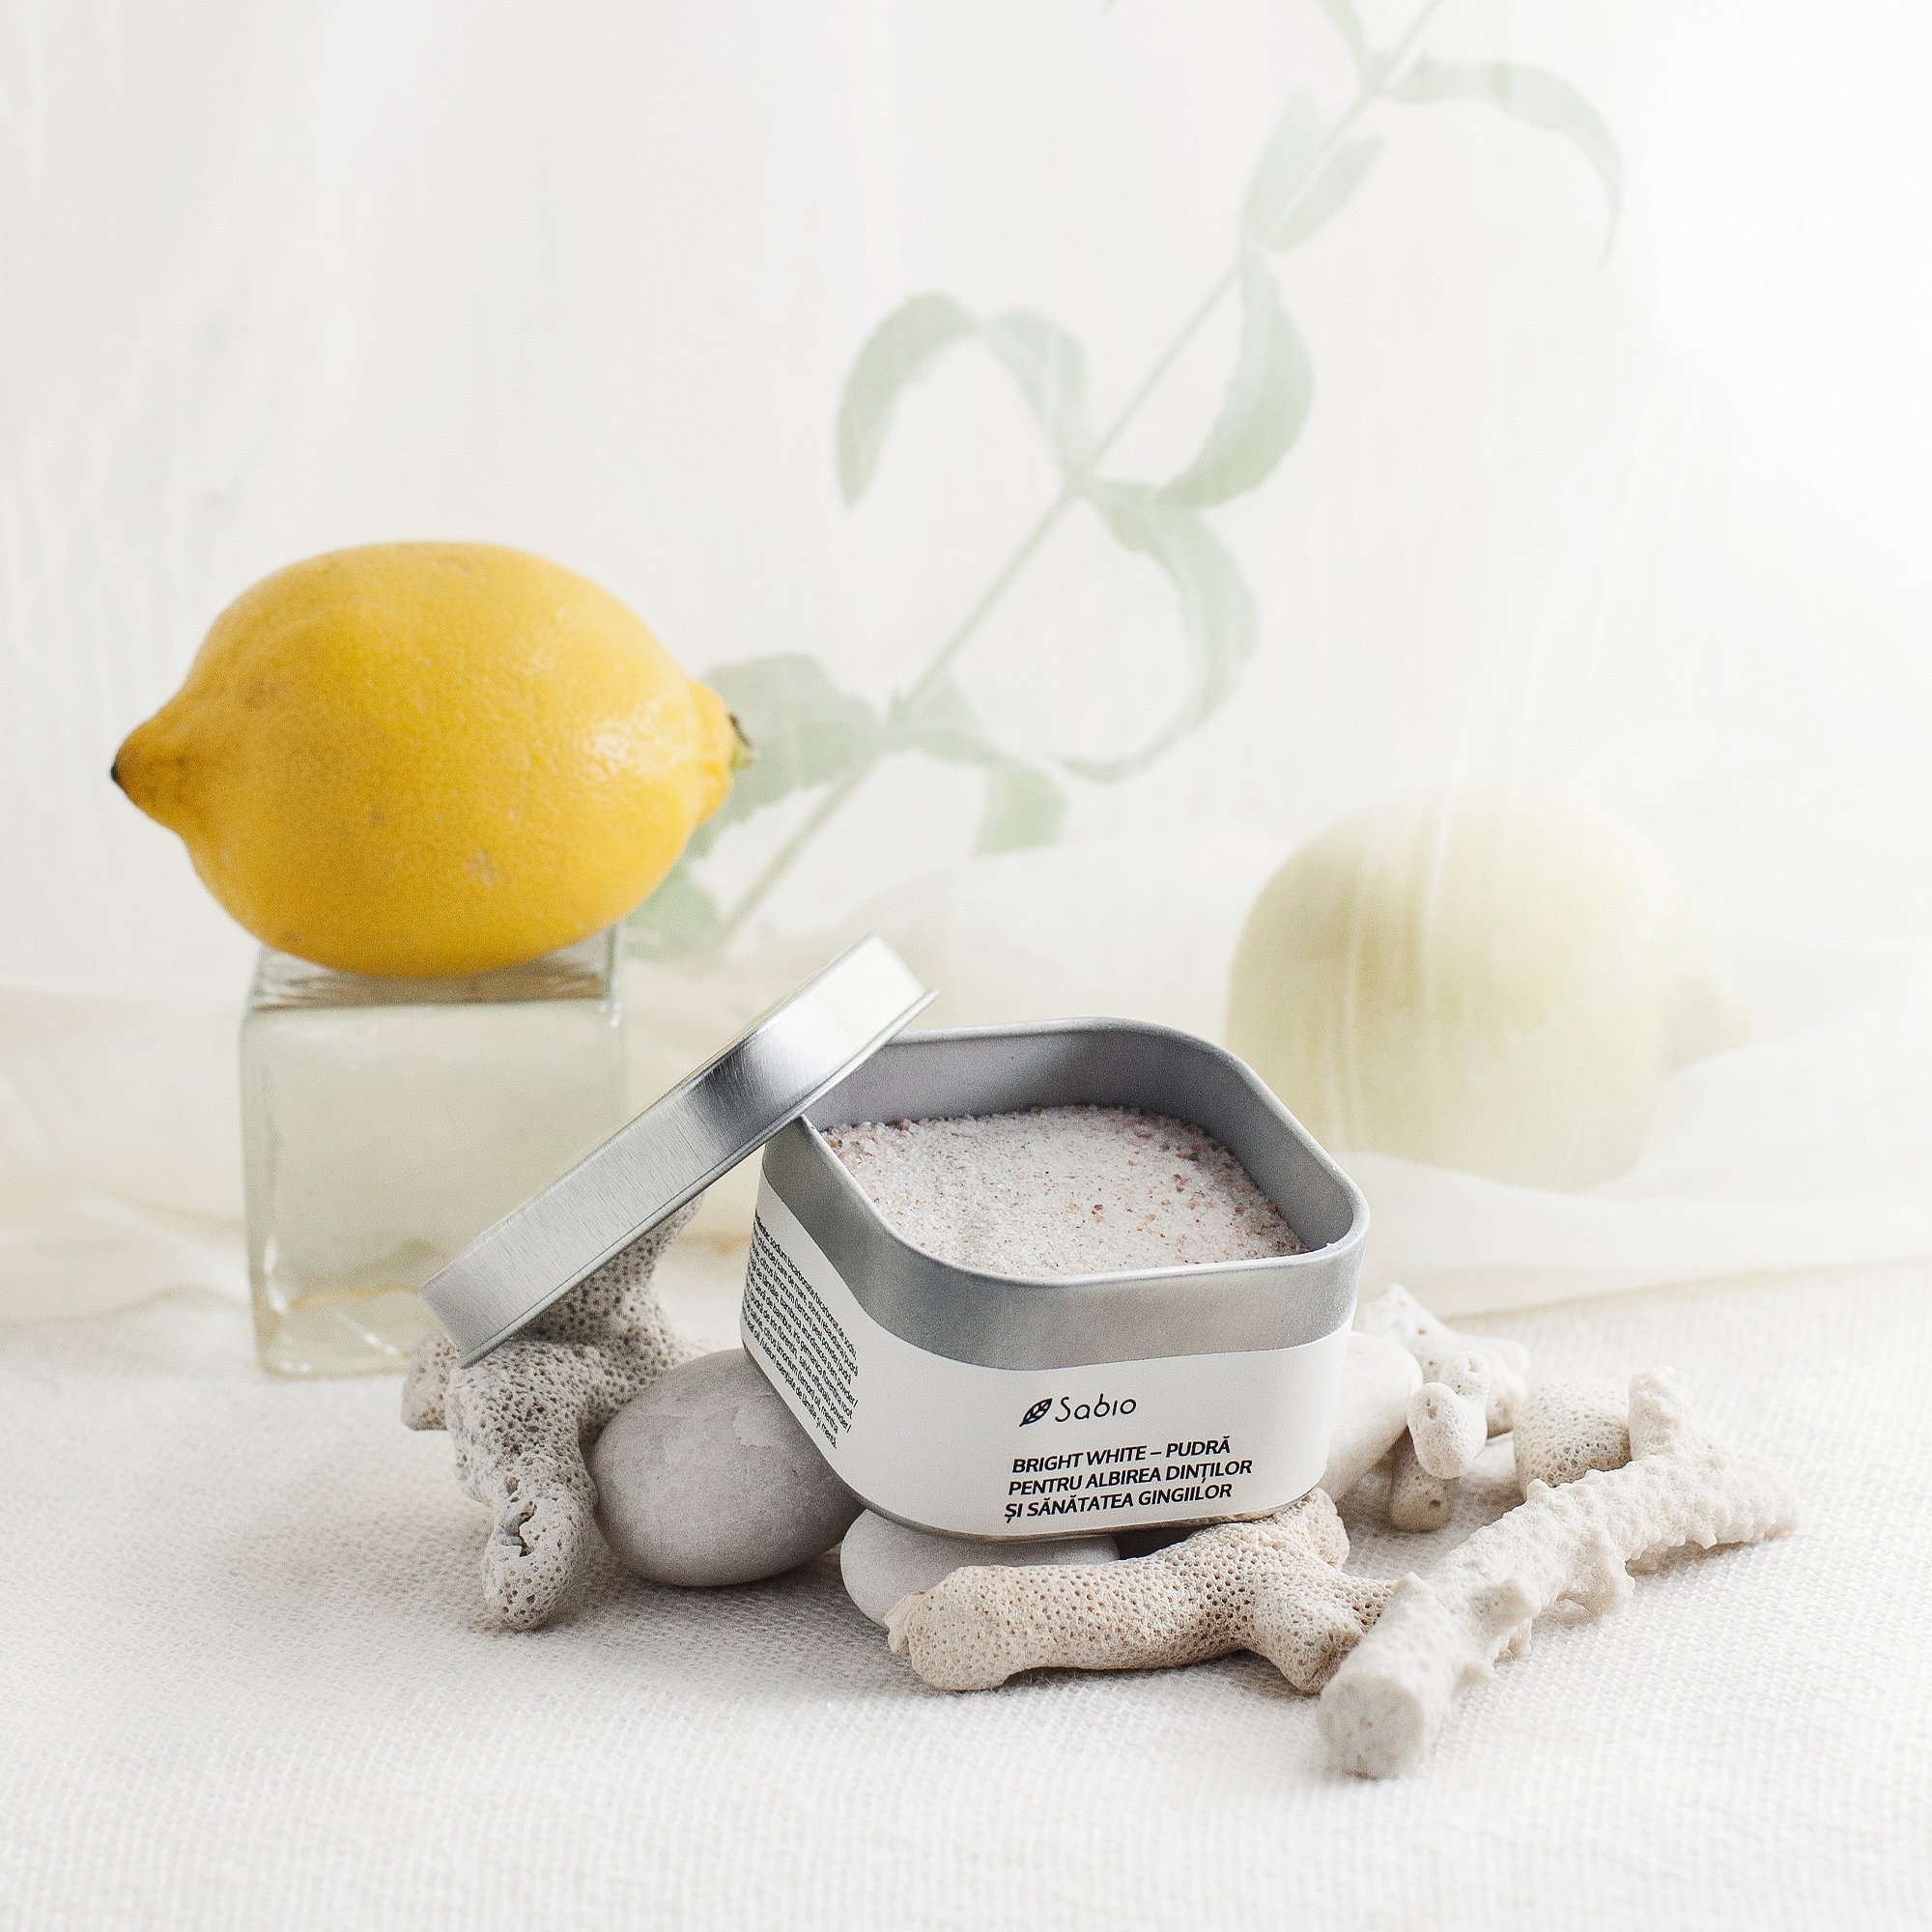 Remineralizing tooth powder